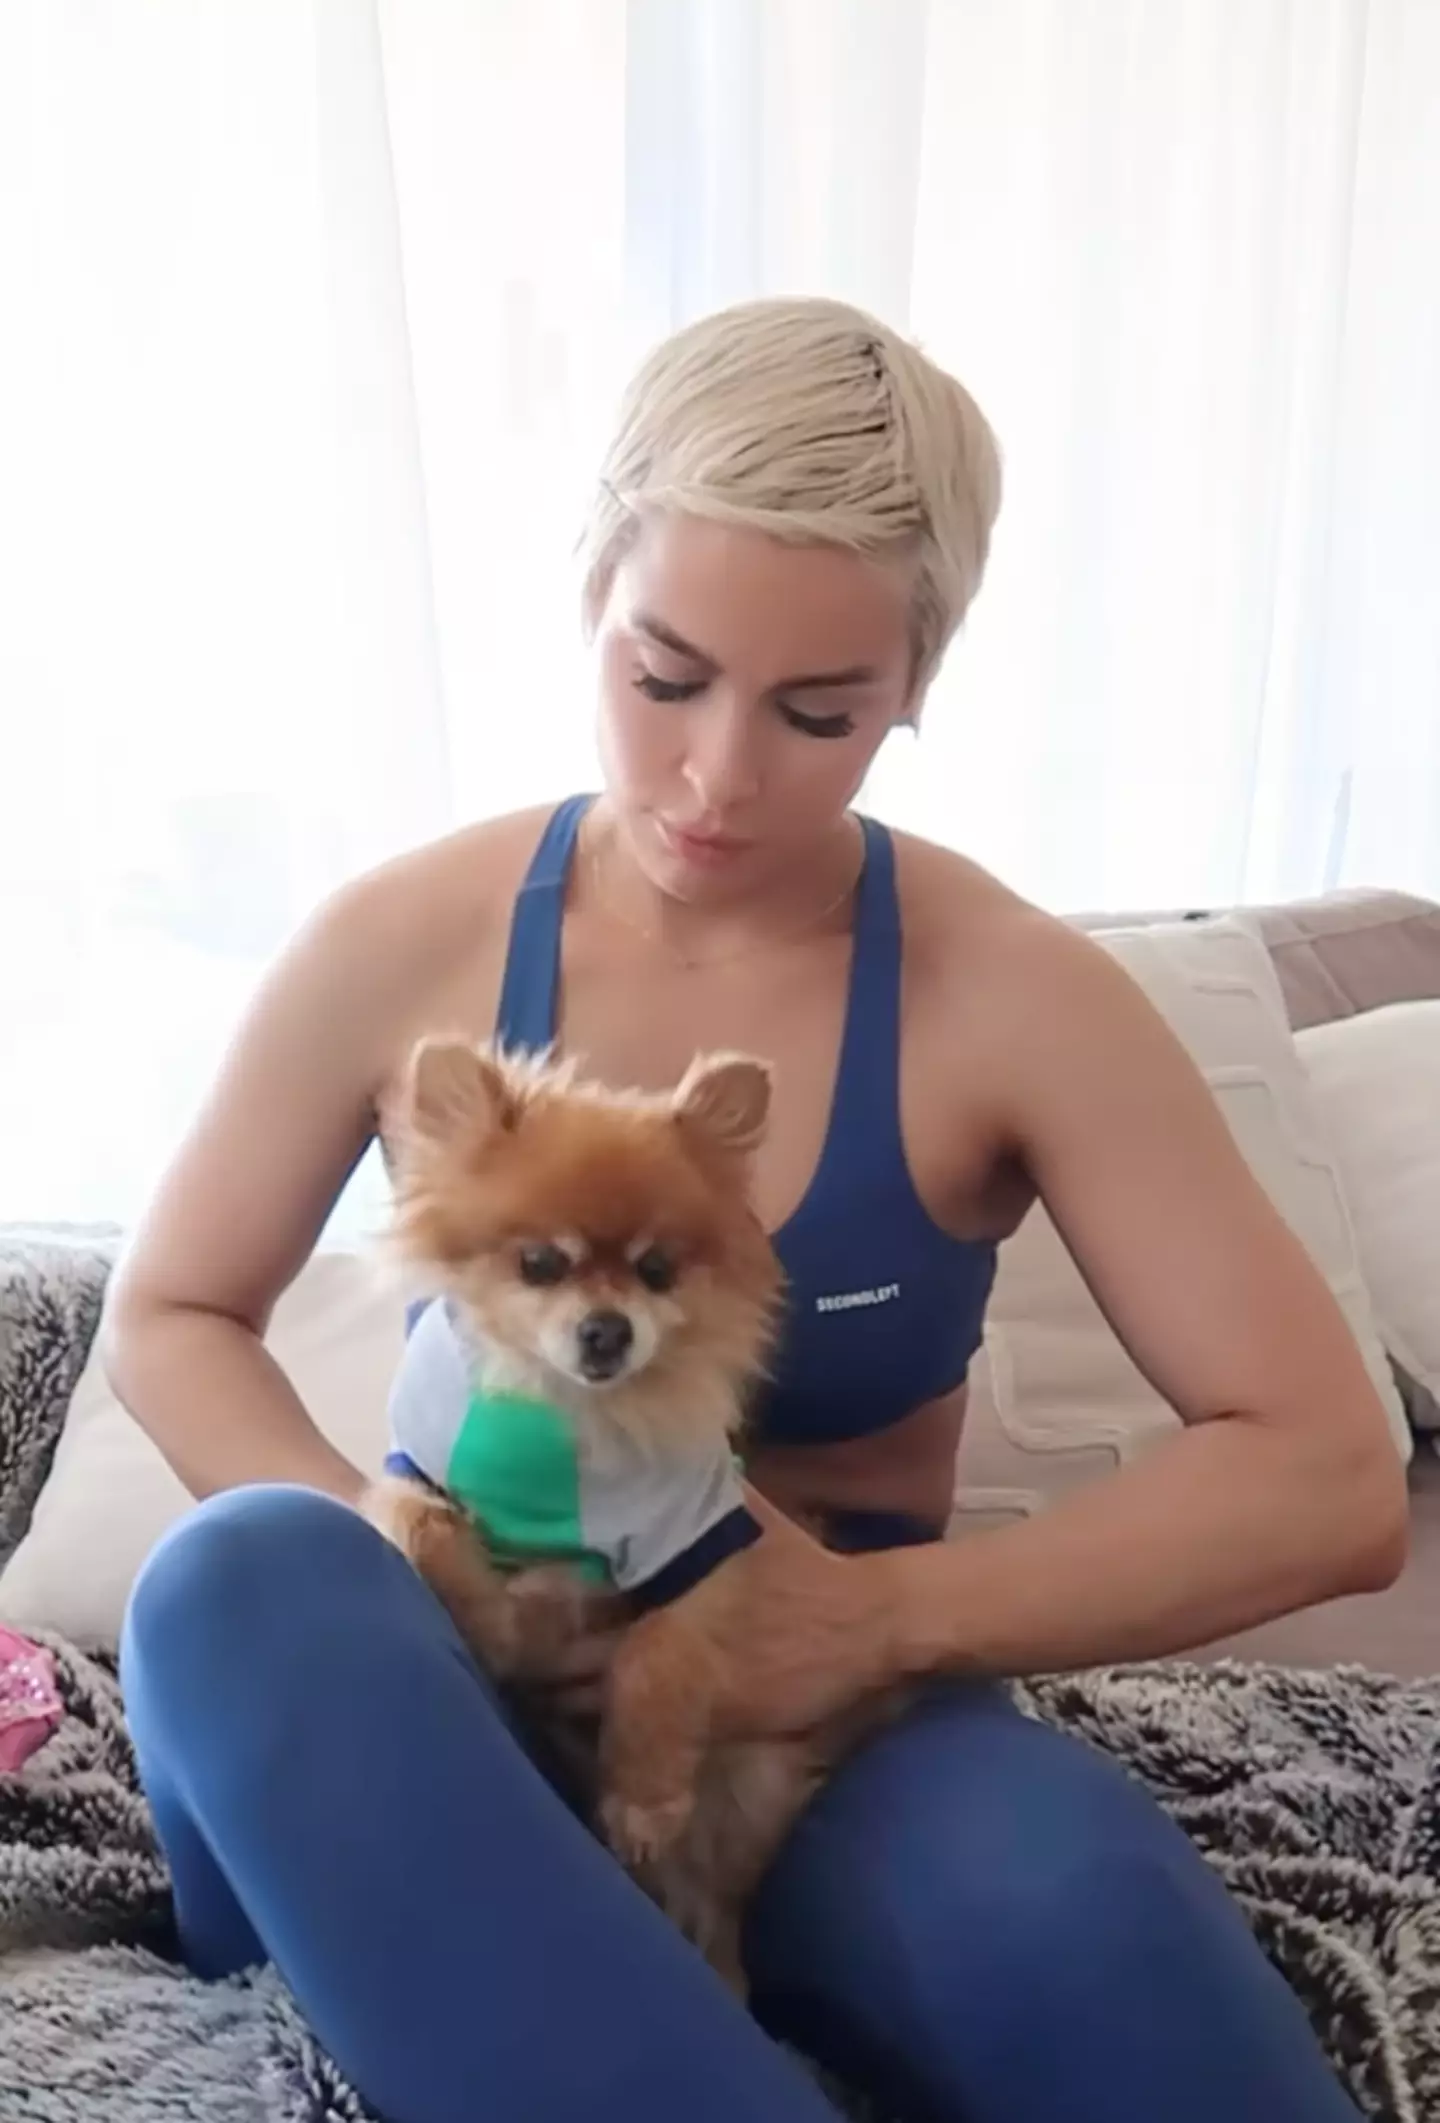 Ellie shared a video of her dressing her dog.